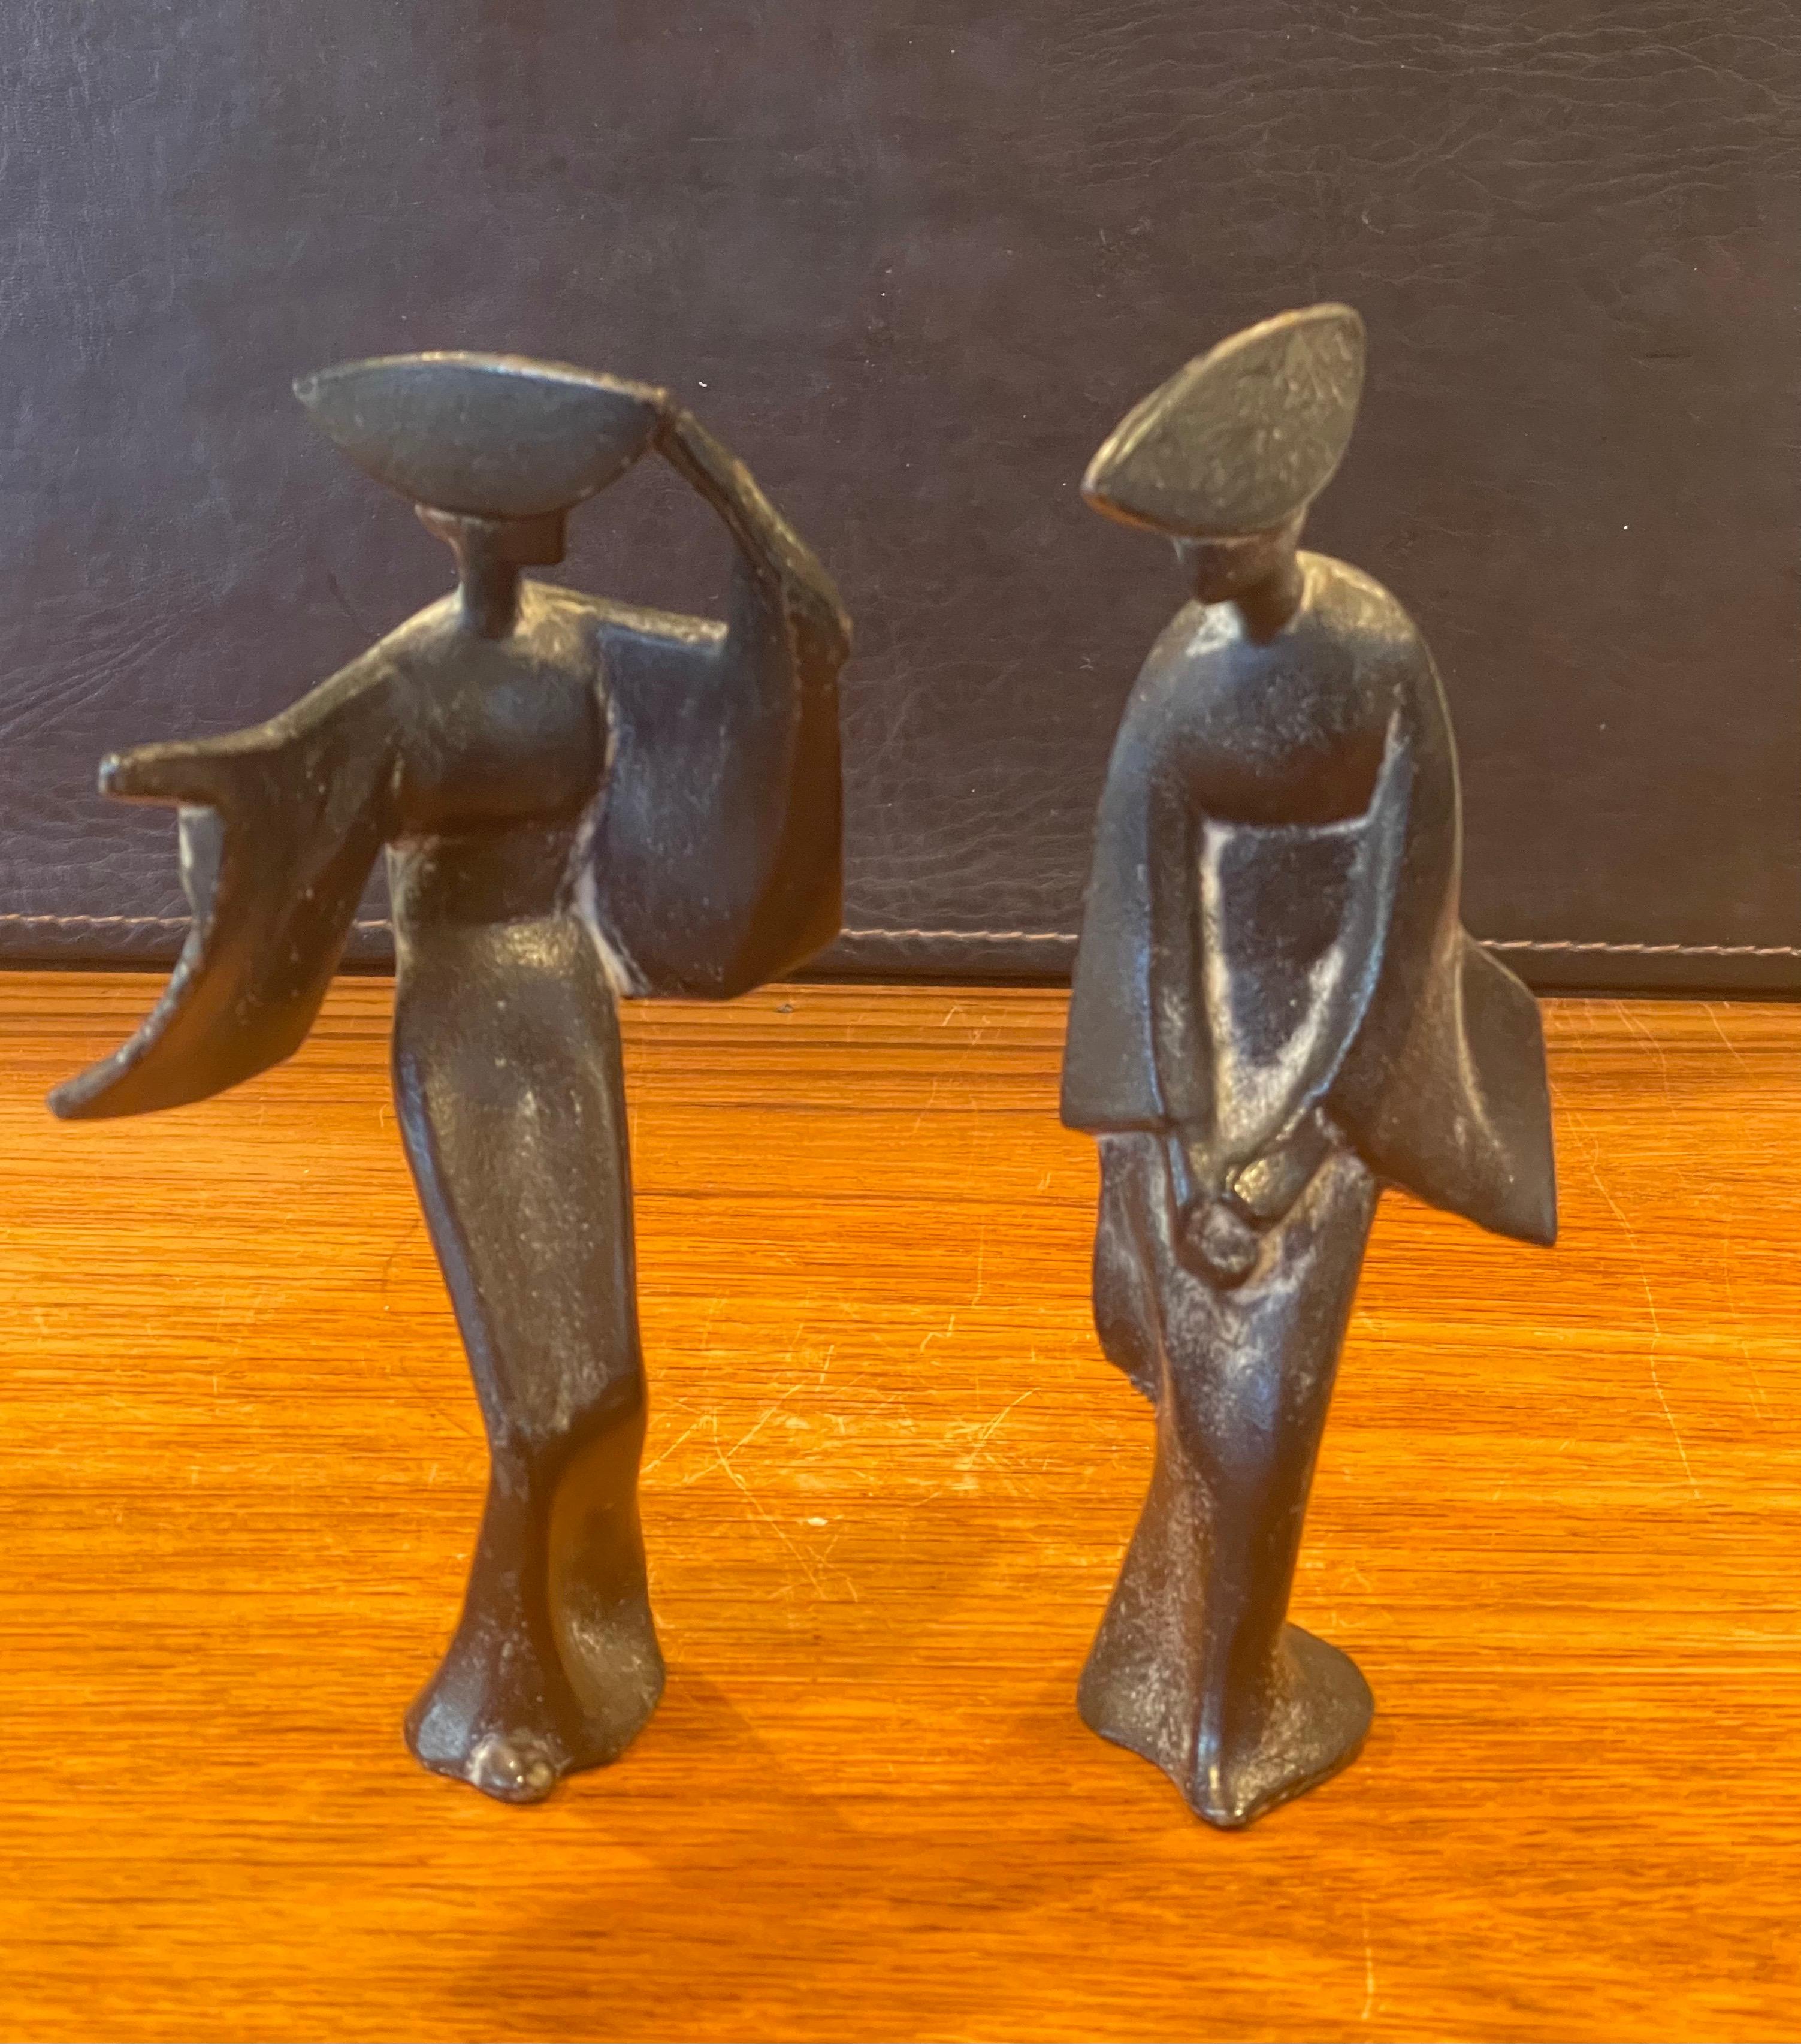 A very cool pair of Japanese geisha figurines, circa 1960s. The pieces are cast iron with verde gris finish and are quite heavy; they would make a great Mid-Century Modern accent in any space! #2119.